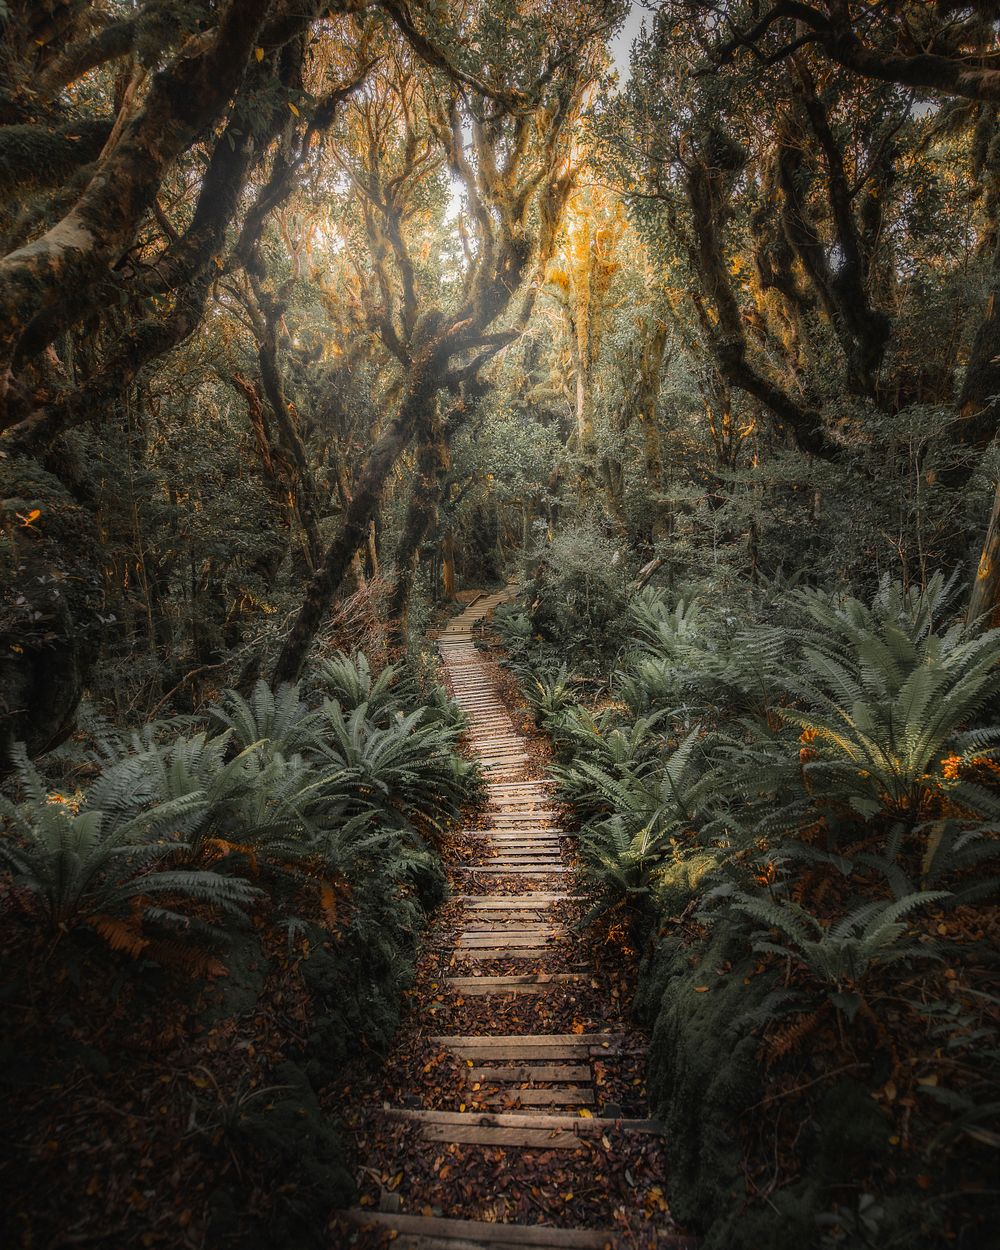 Pathway in New Zealand tropical jungle